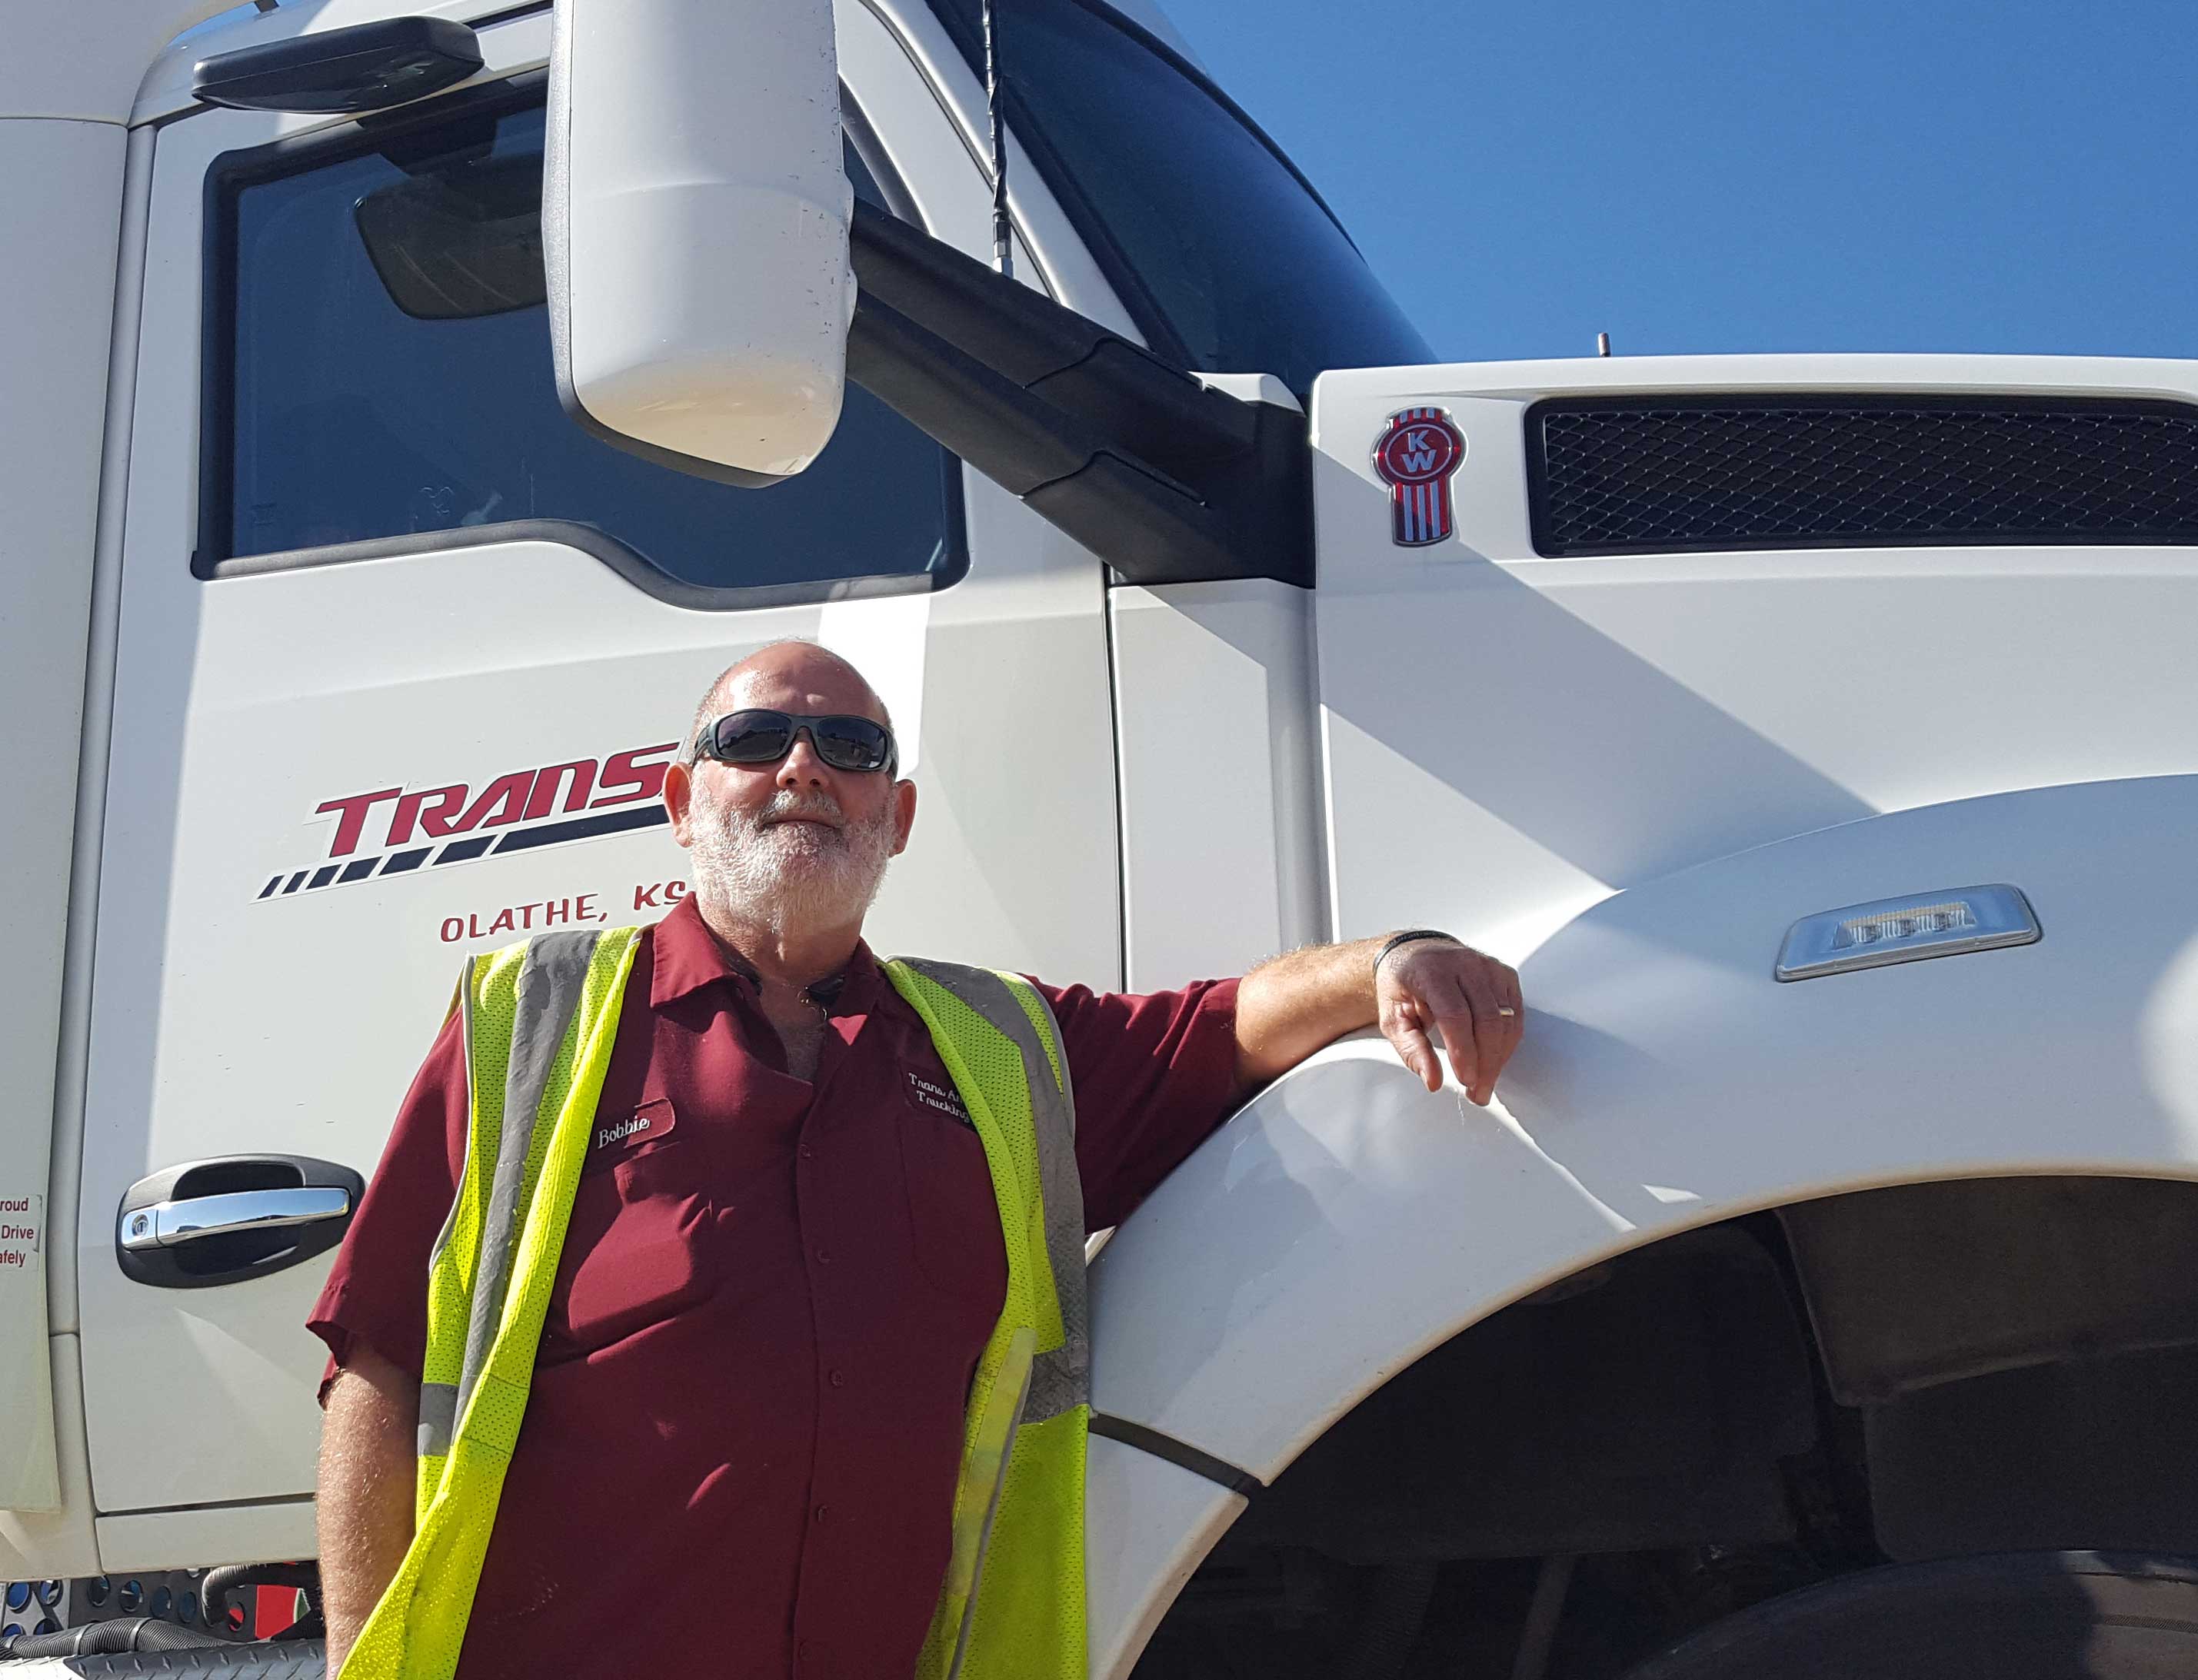 Bobbie Neal is a veteran in more ways than one. After leaving the Air Force in 1978, he started his career in trucking, spending the last 25 of those years with TransAm Trucking.